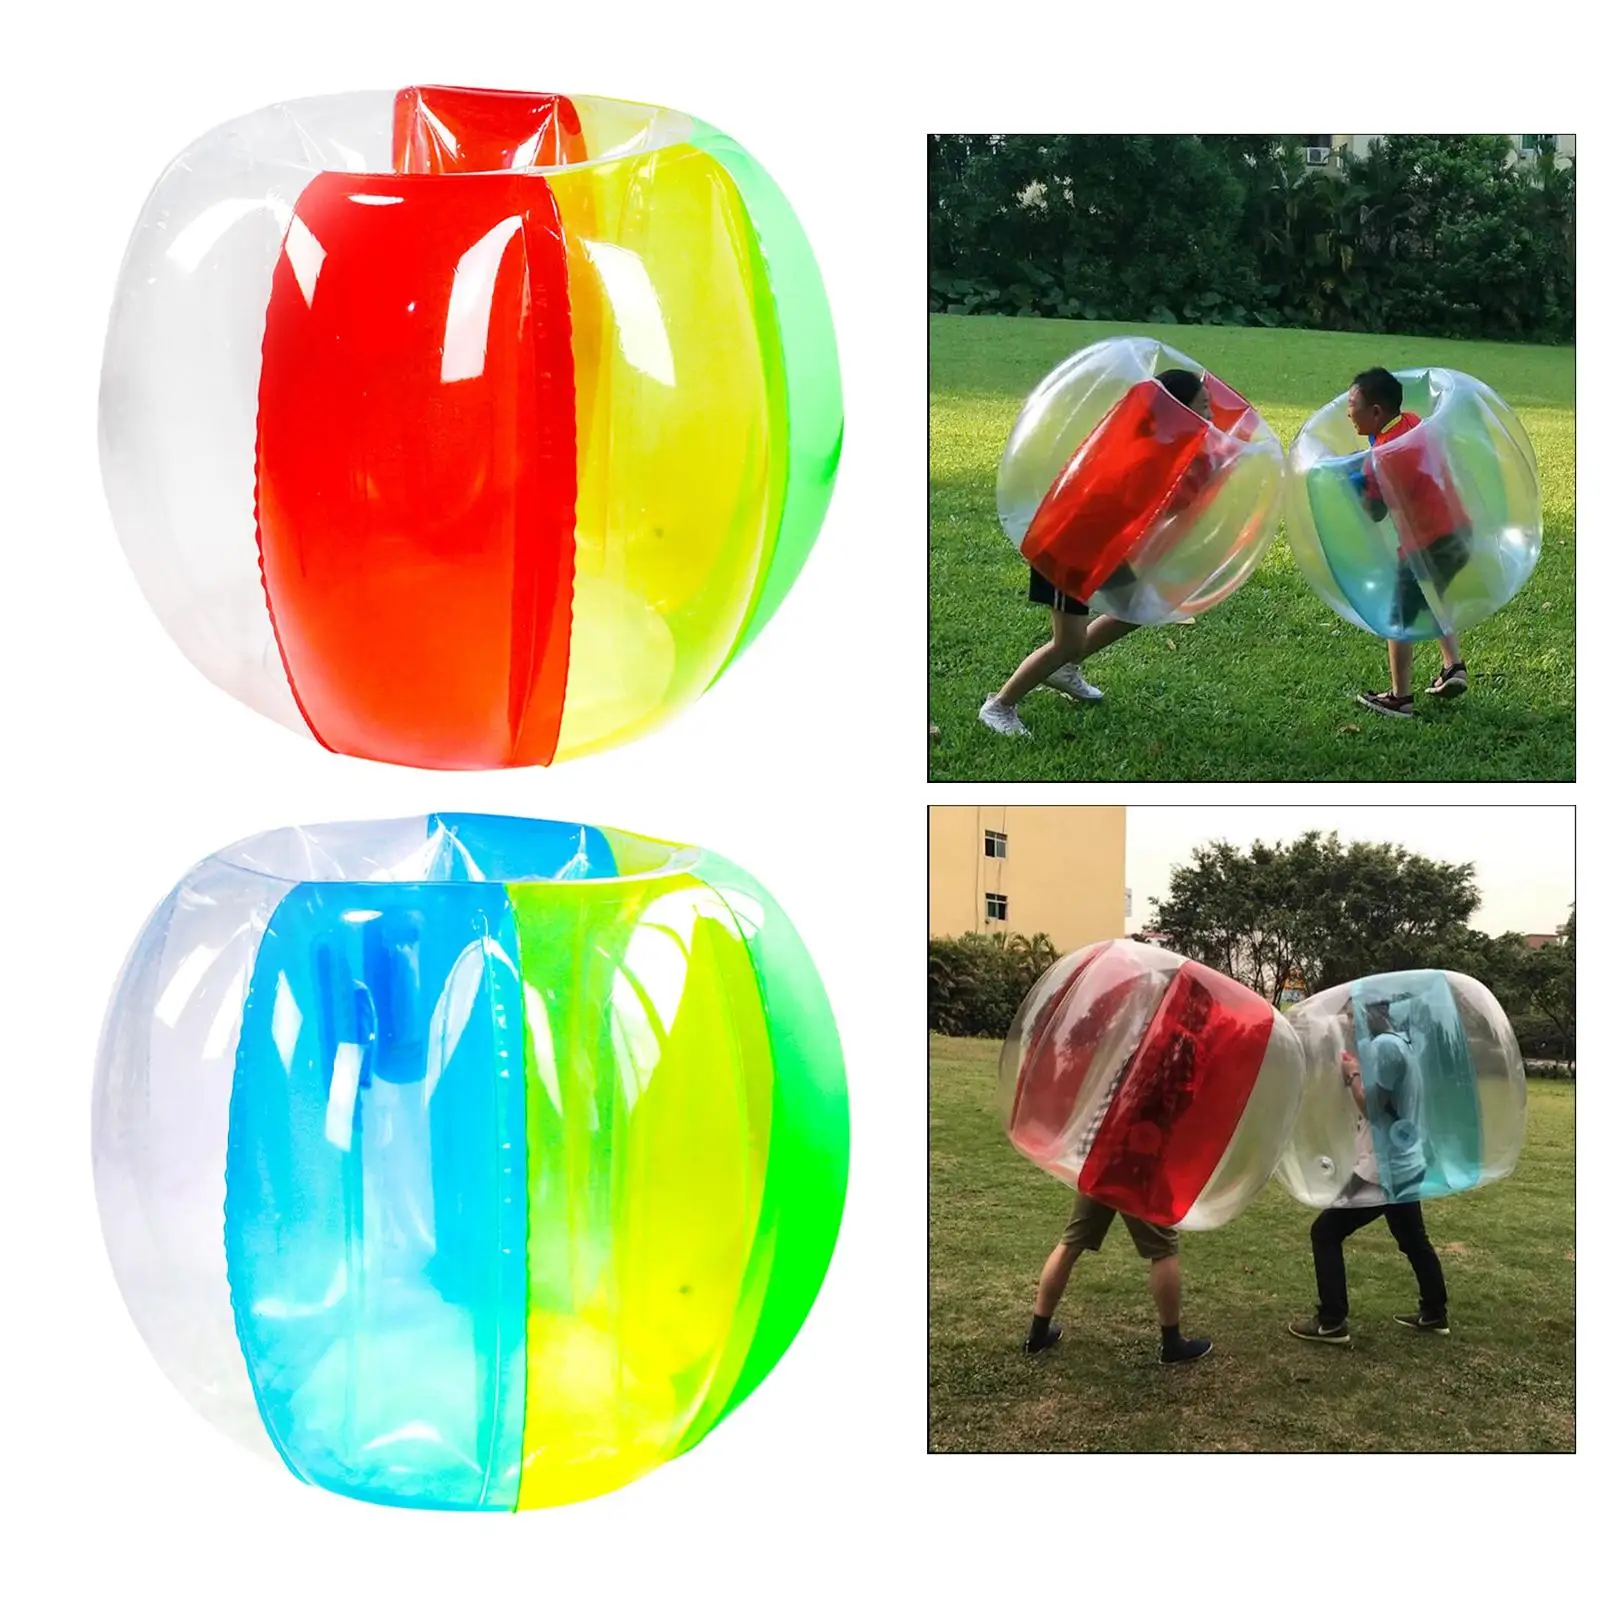 Bumper Balls for Adults, Inflatable  ball Sumo Bumper Toys, Kids Adult Sports Outdoor Games